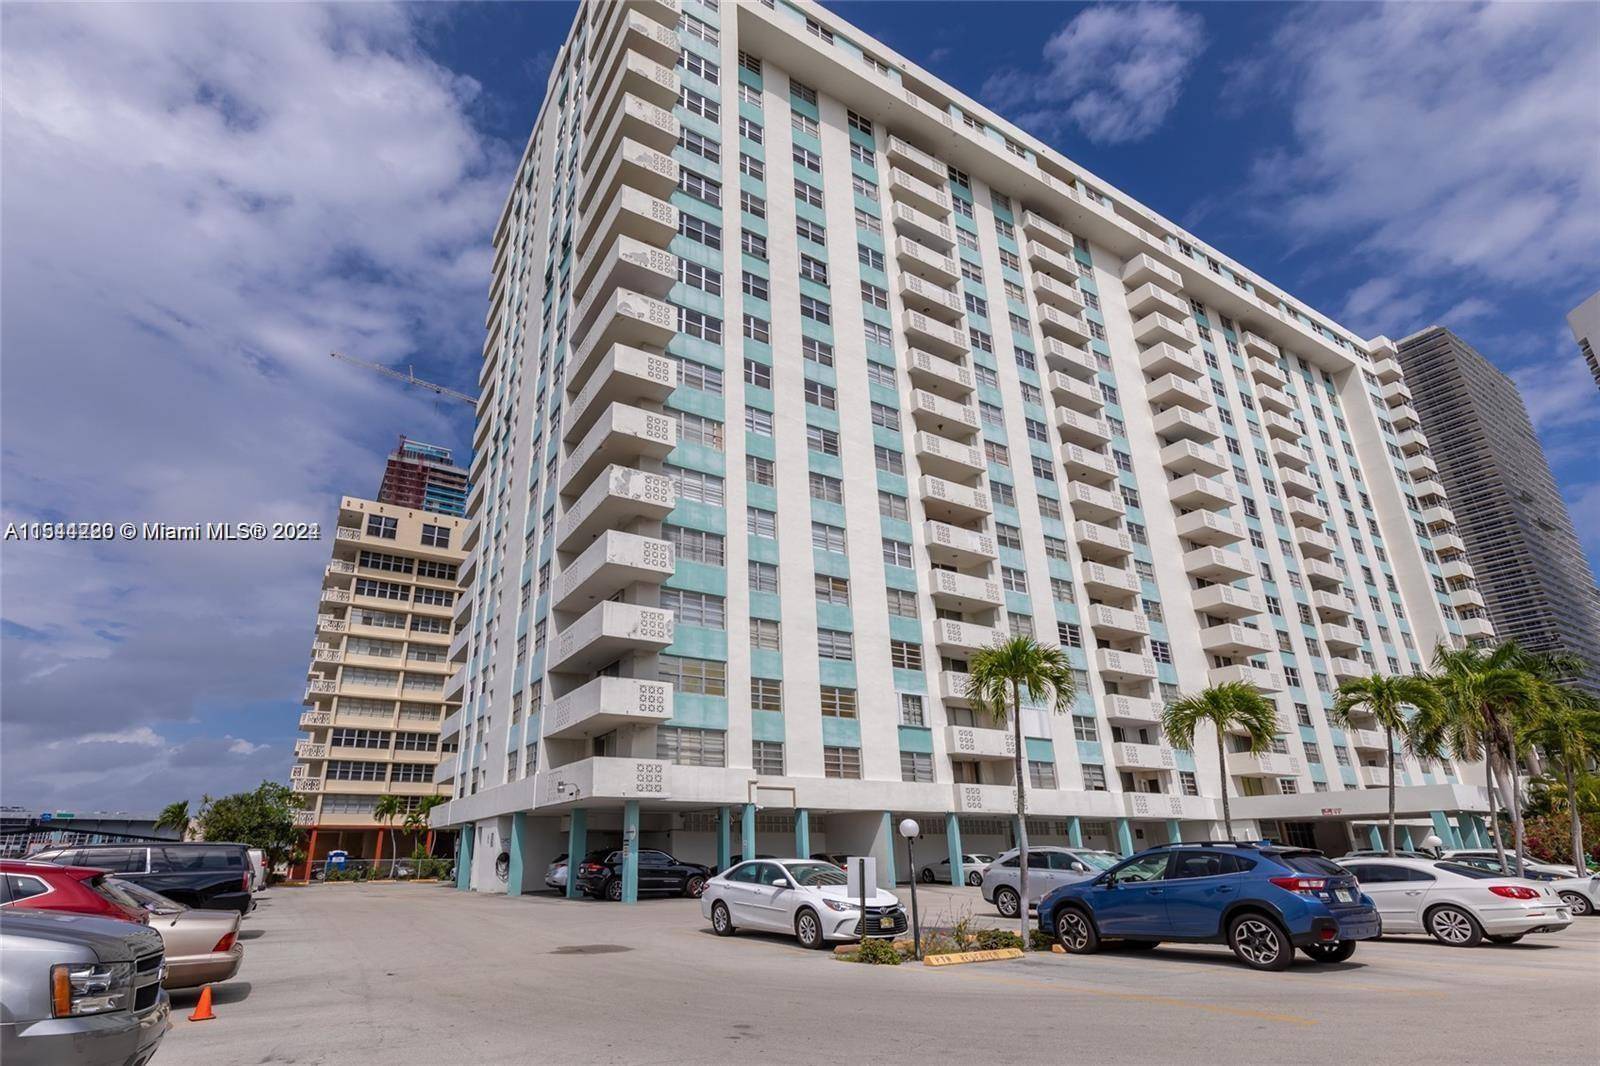 Renovated, split floor plan unit, located in the well maintained building directly across the street from the new city park with access to the beach !